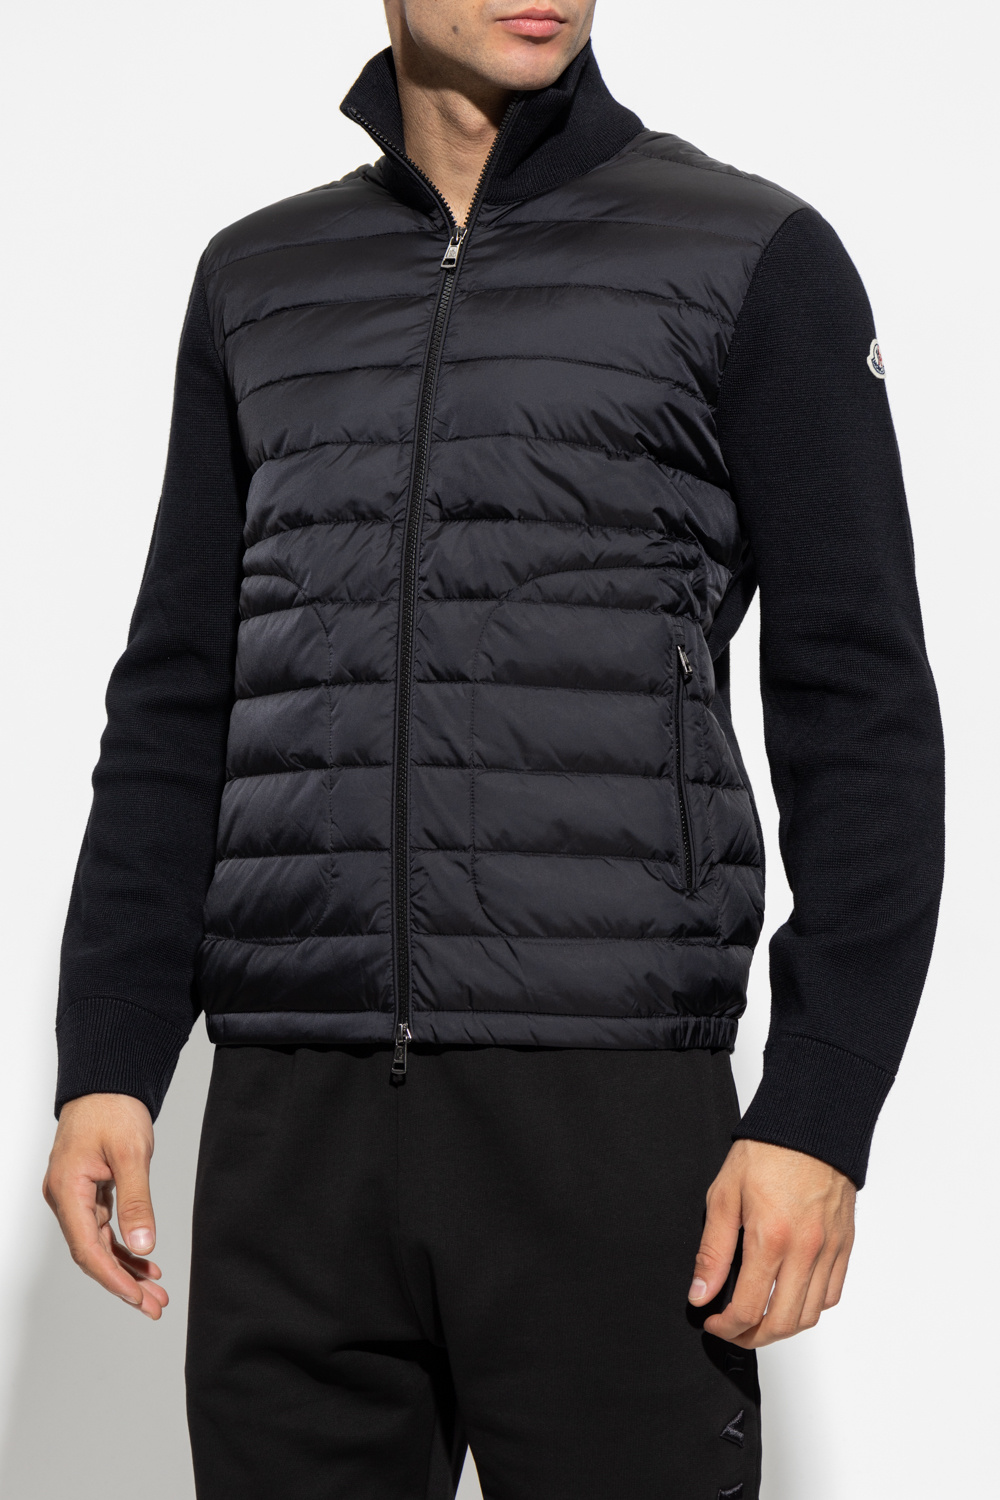 Moncler Add to wish list